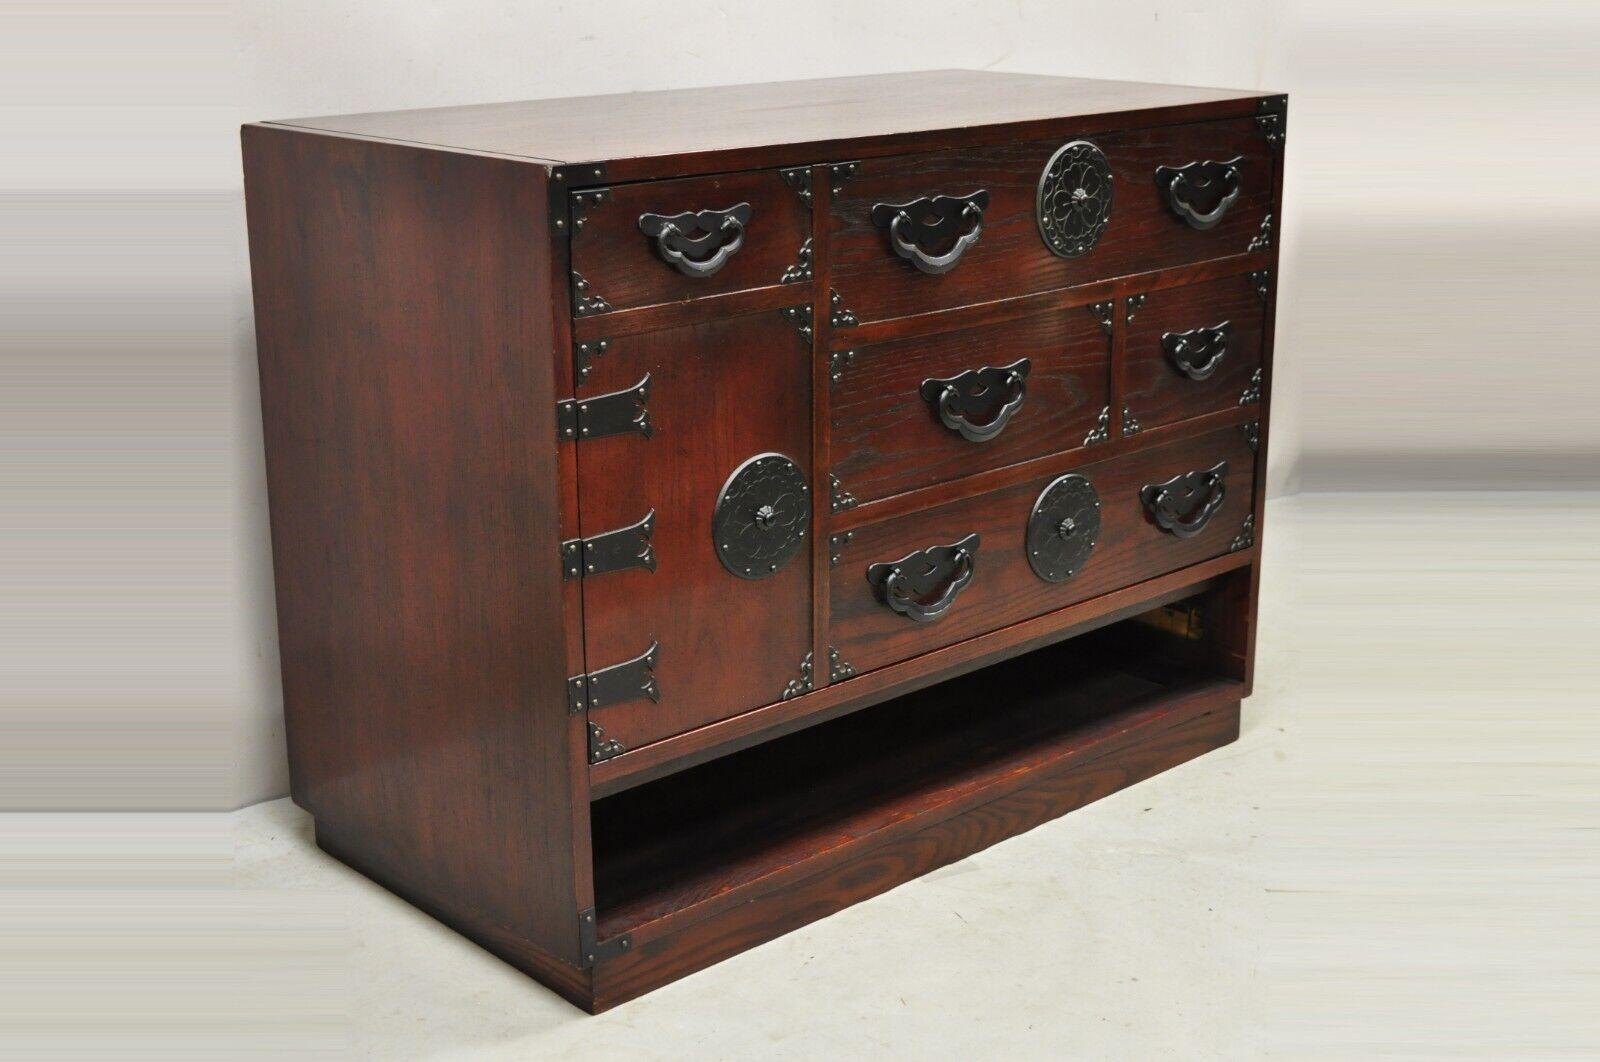 Vintage Baker Oriental Asian Tansu style Campaign chest bar unit cabinet. Item features faux drawer front with opening and slide face, 2 interior drawers, metal hardware, beautiful wood grain, original label, 2 dovetailed drawers, quality American